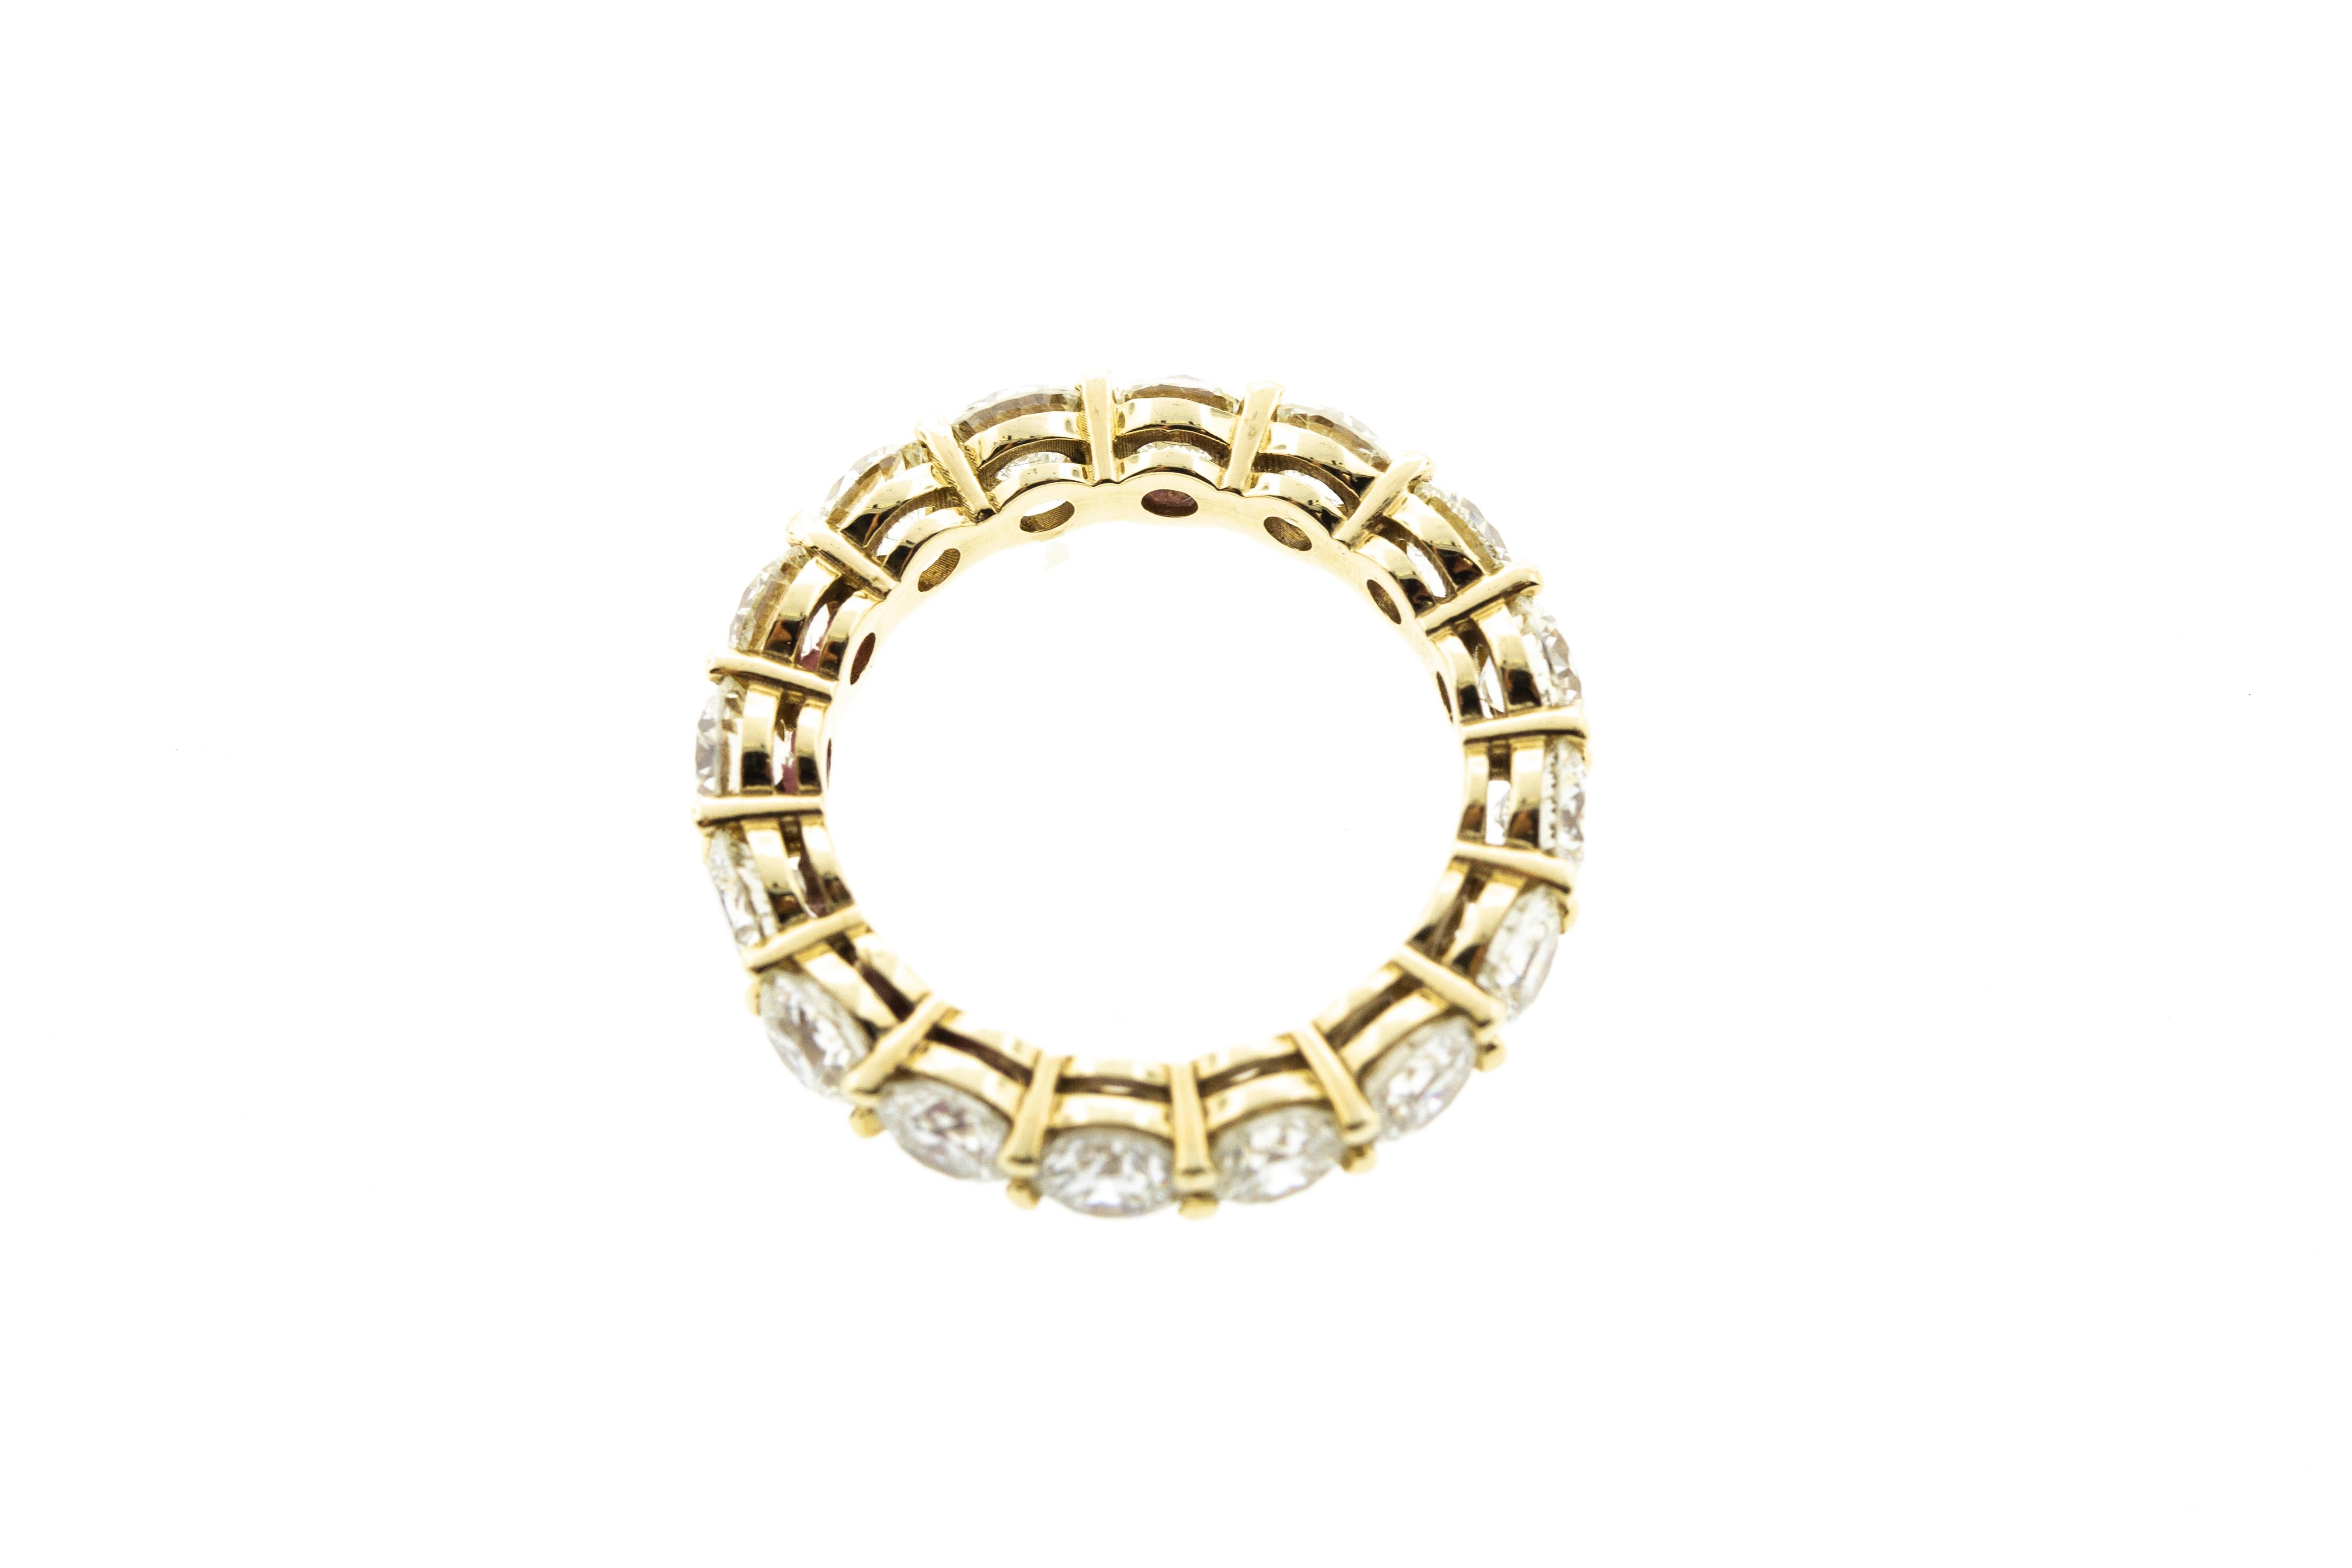 This round diamond eternity band is set in yellow gold and features a shared prong setting. 16 round diamonds are included for a total carat weight of 4.11. 